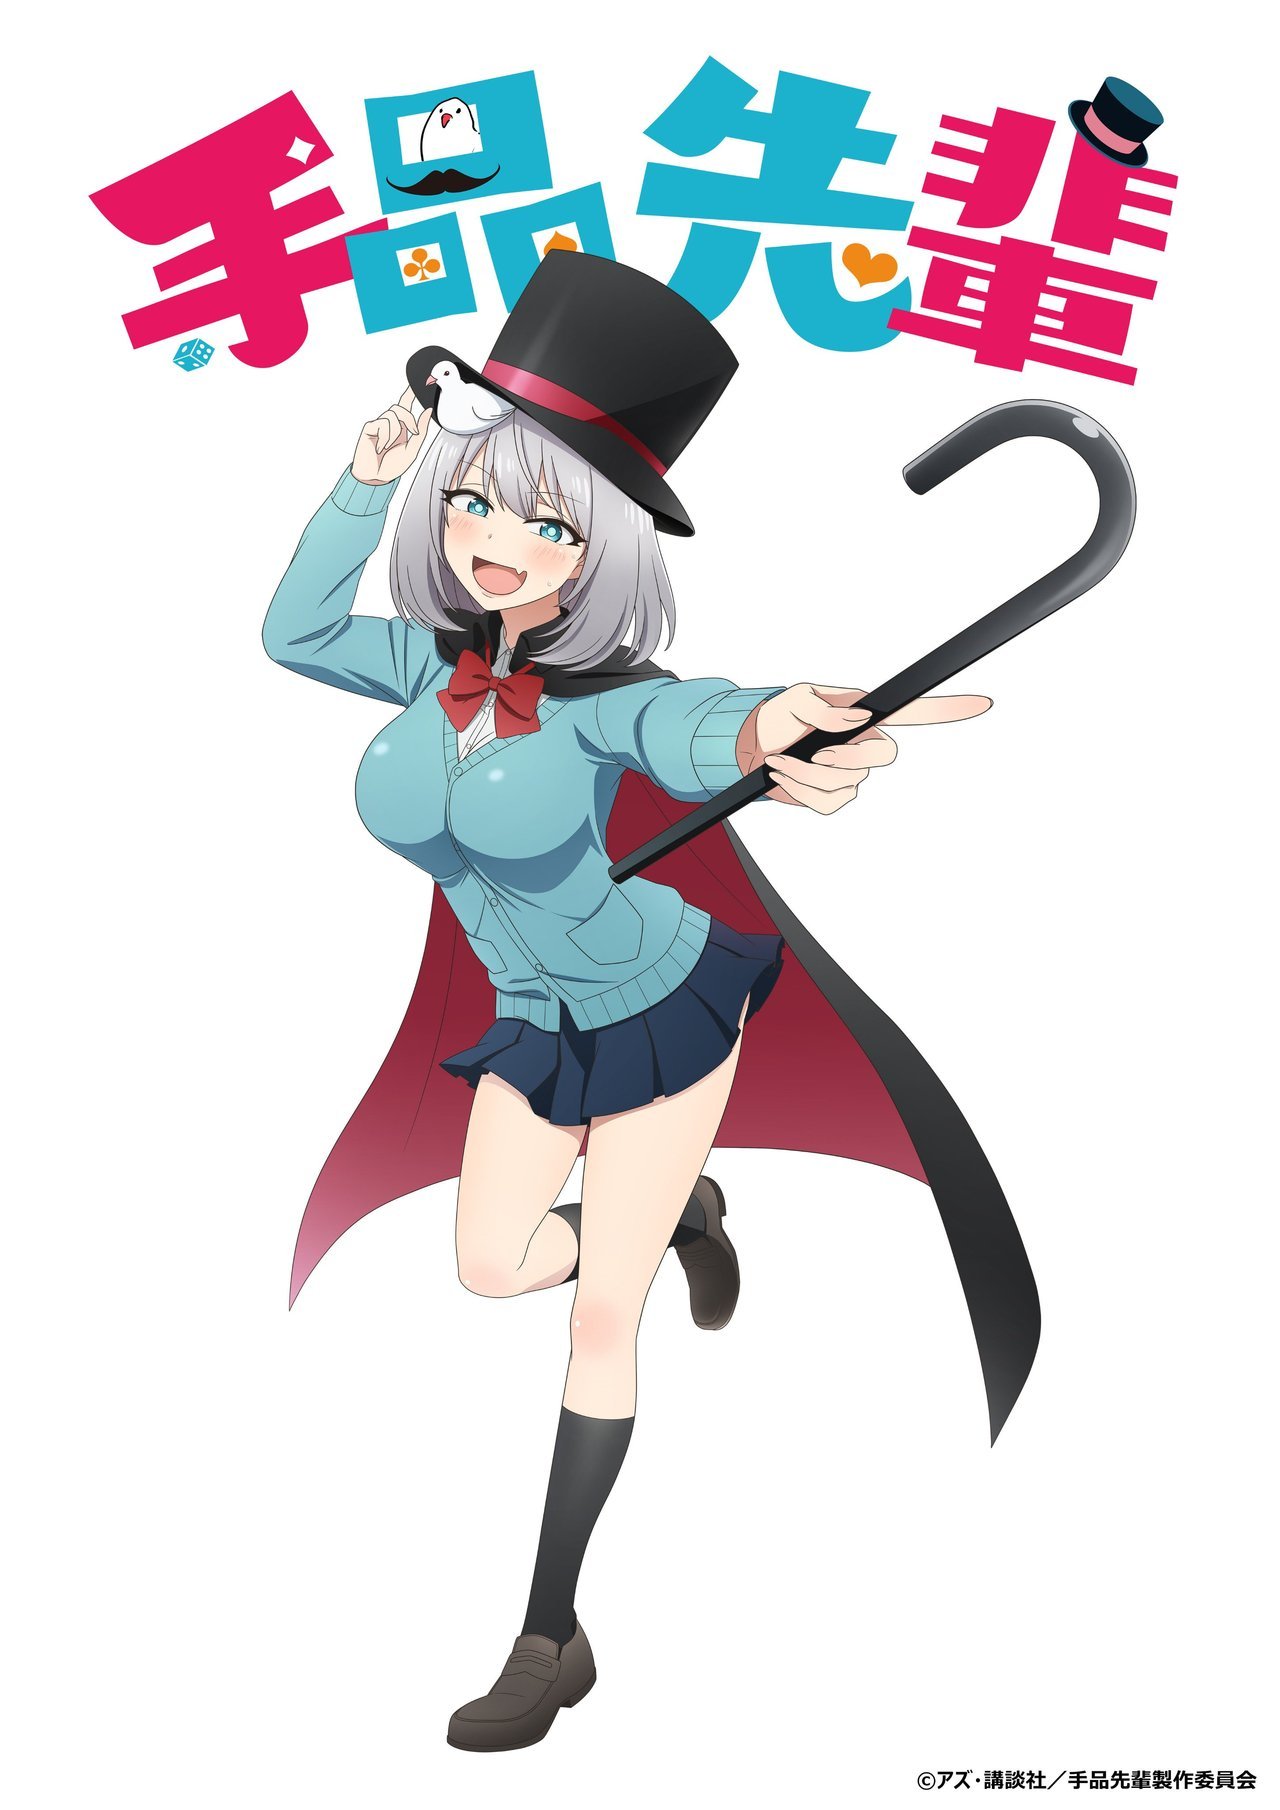 The official website for the anime adaptation of Azuâs manga series, âTejina-senpaiâ (Magical Sempai), has launched. It will premiere in 2019. -Synopsis-ââOur MC finds out that his school requires him to join a club and during his reluctant search he...